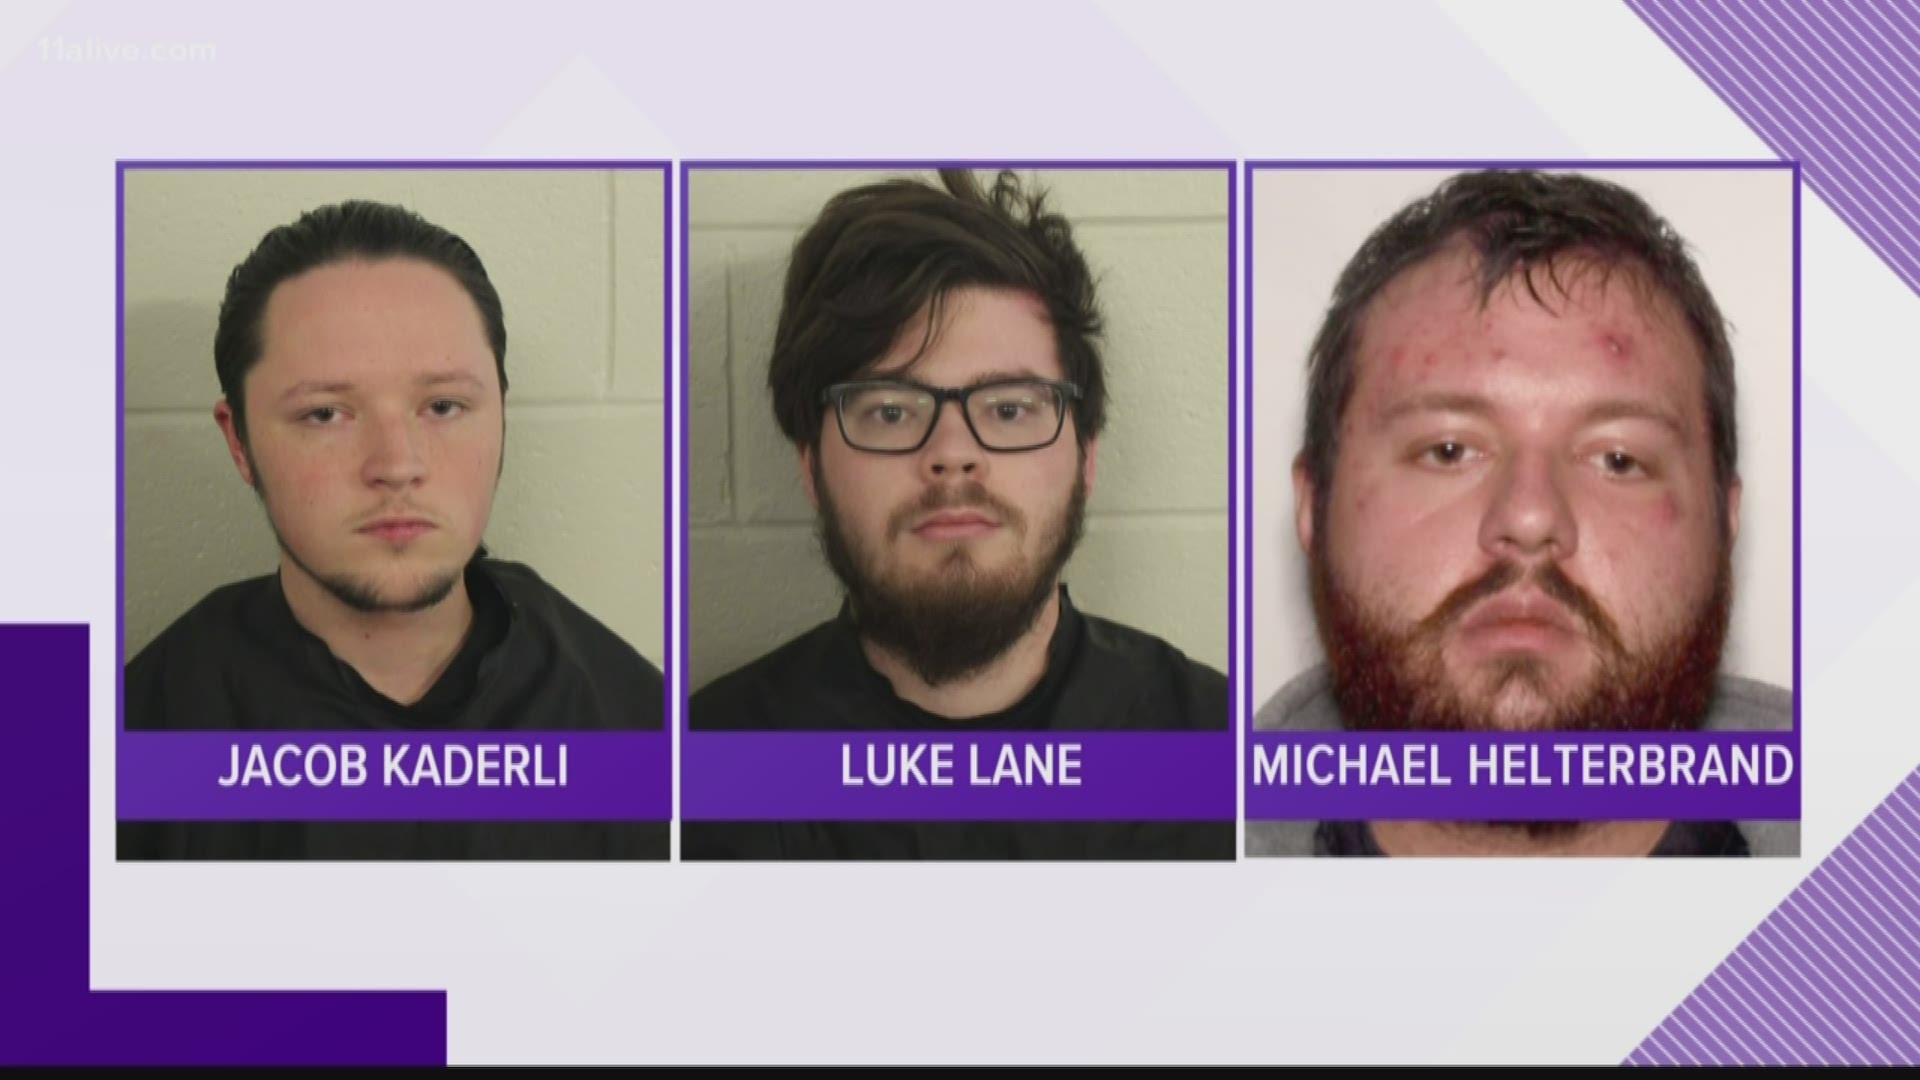 The three men are associated to the white supremacist group The Base, according to court documents unsealed Friday.